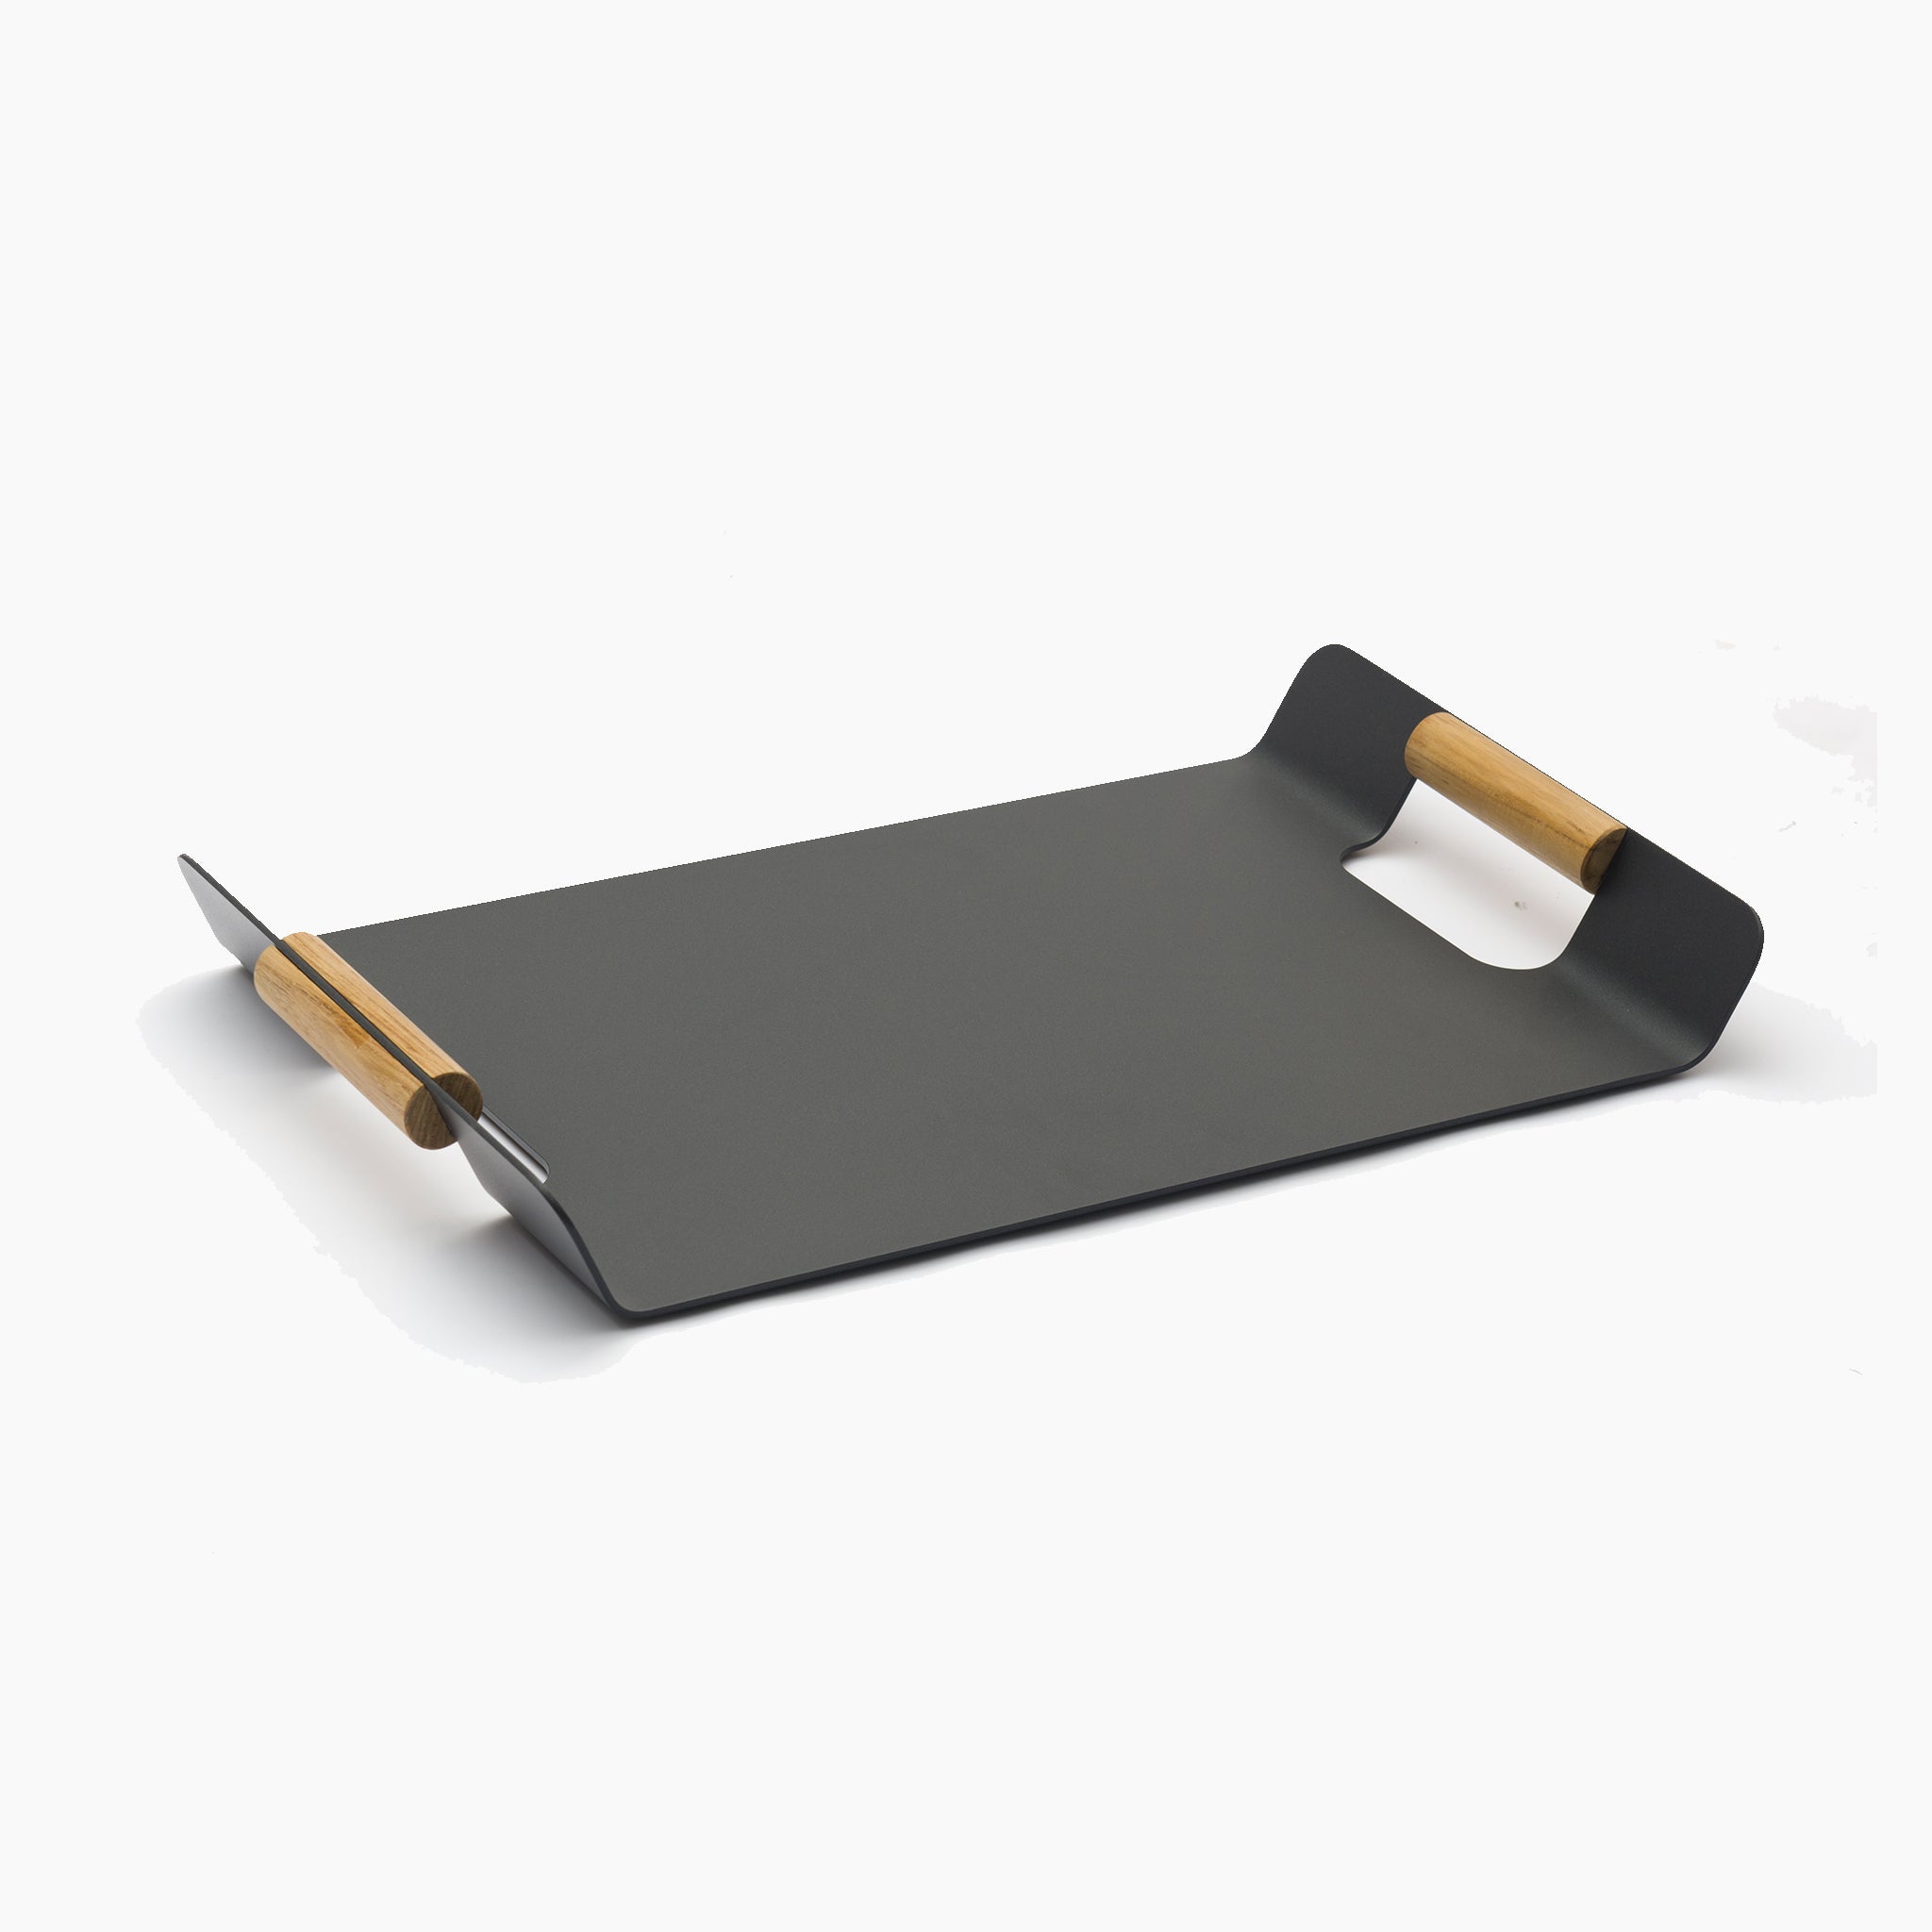 Tracy Serving Tray with Teak Handles in Charcoal